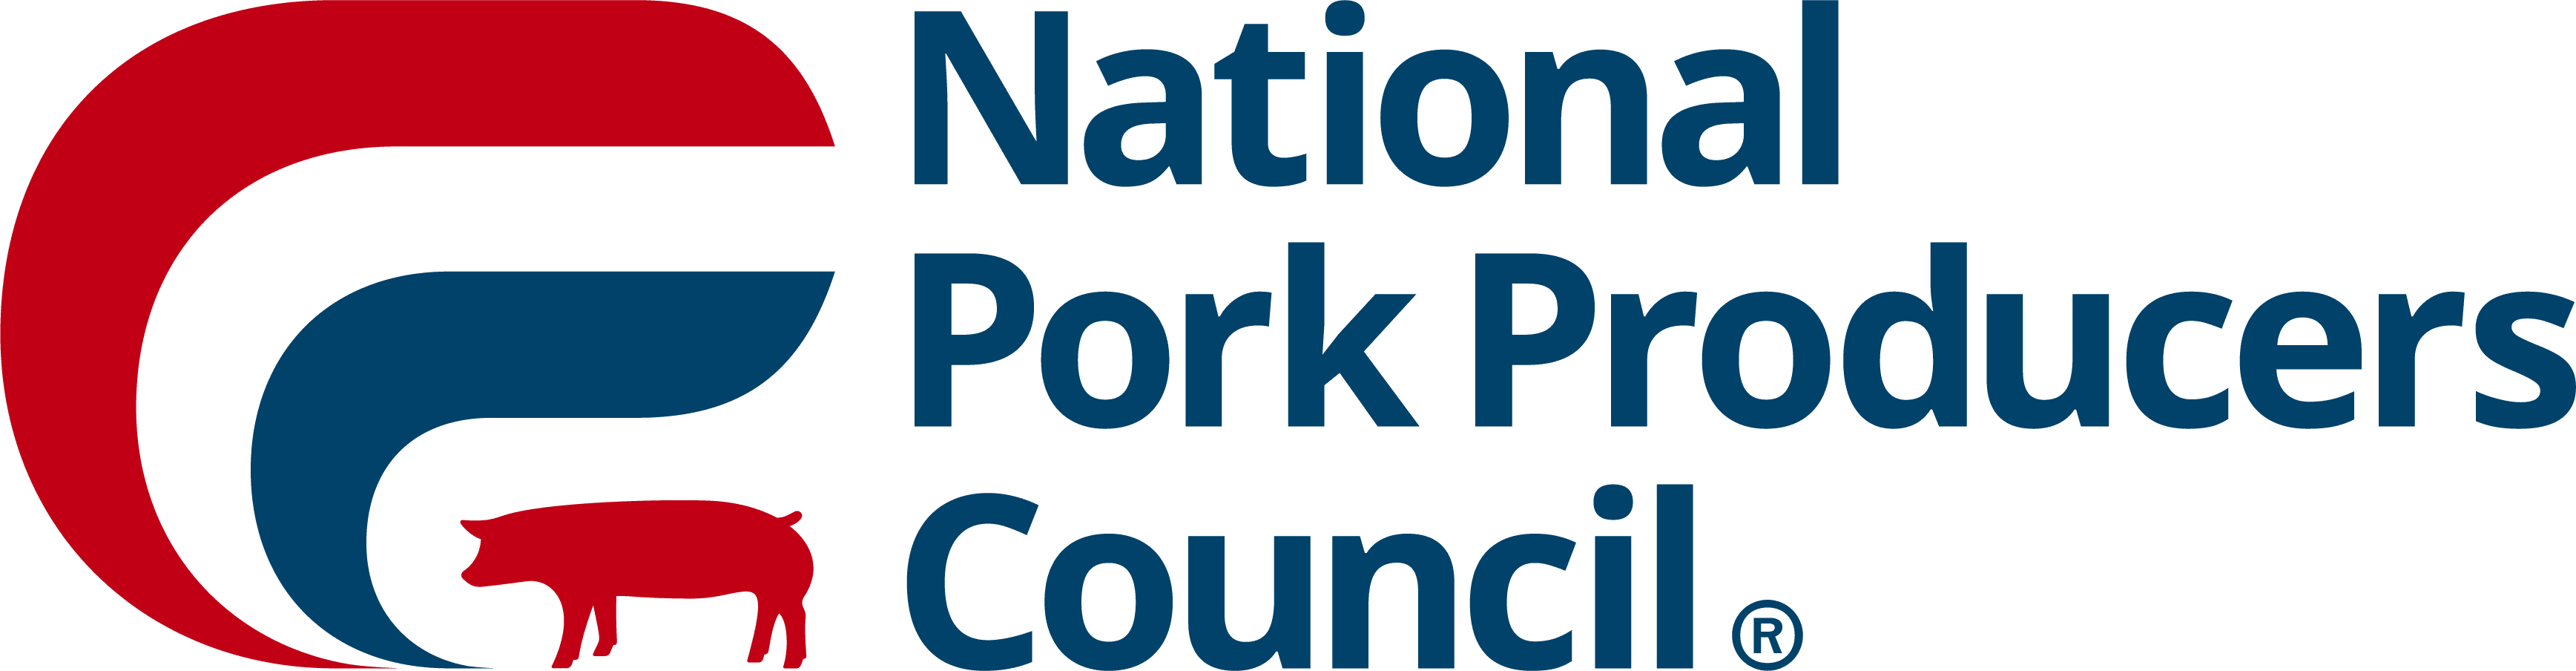 This is the logo for the National Pork Producers Council.